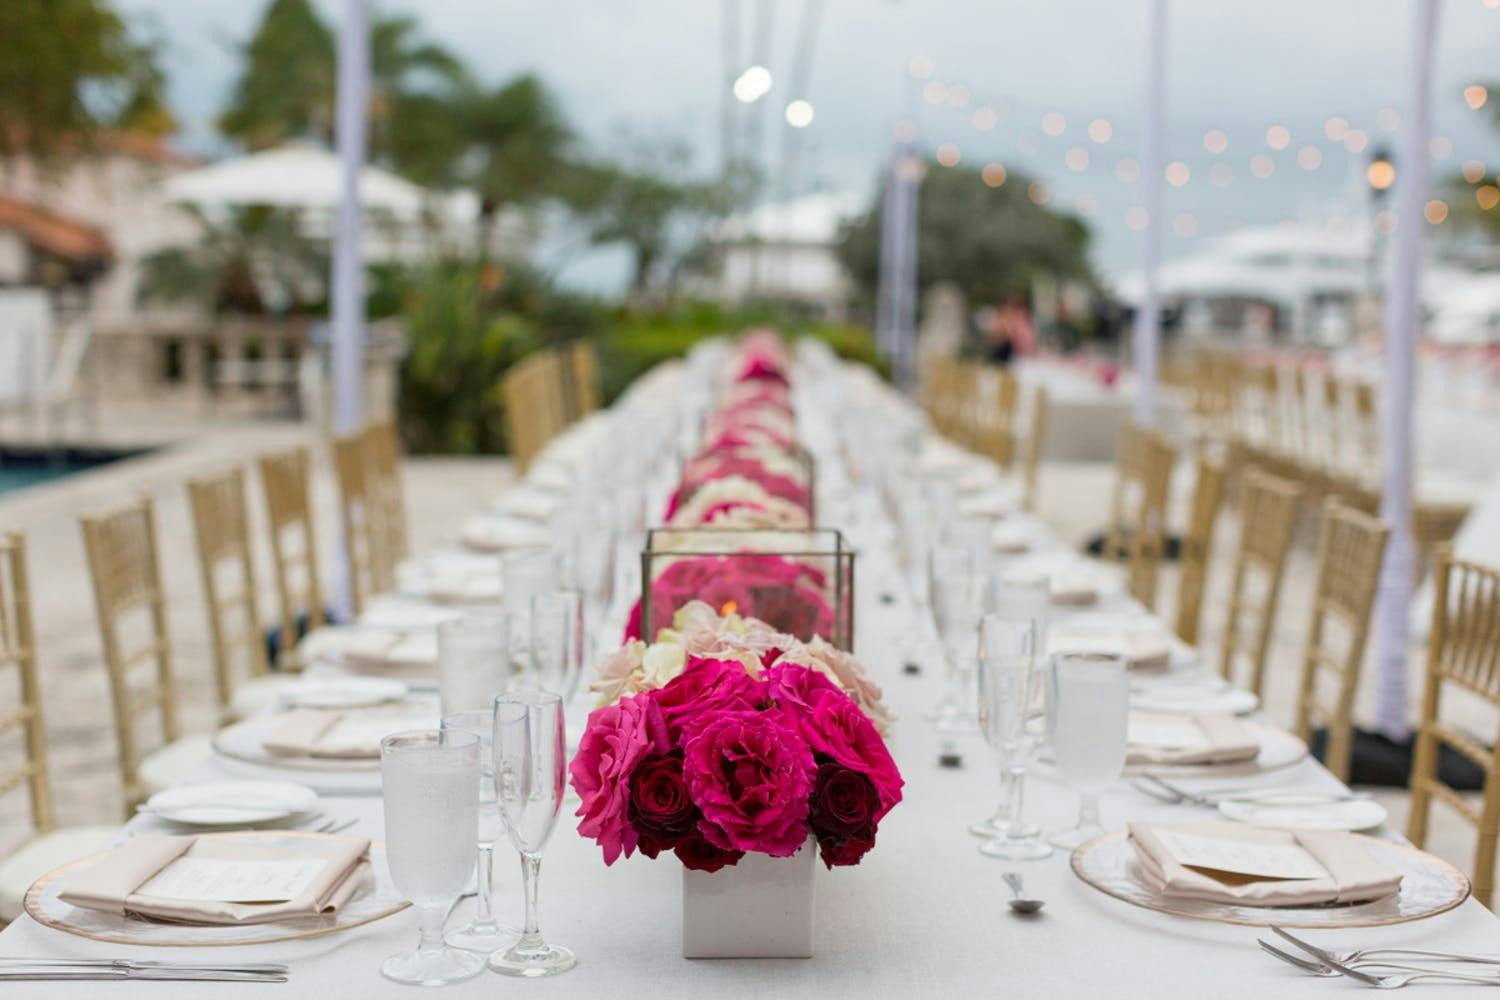 Mod-Beach Centerpiece With Pops of Pink and Sleek White Vases | PartySlate